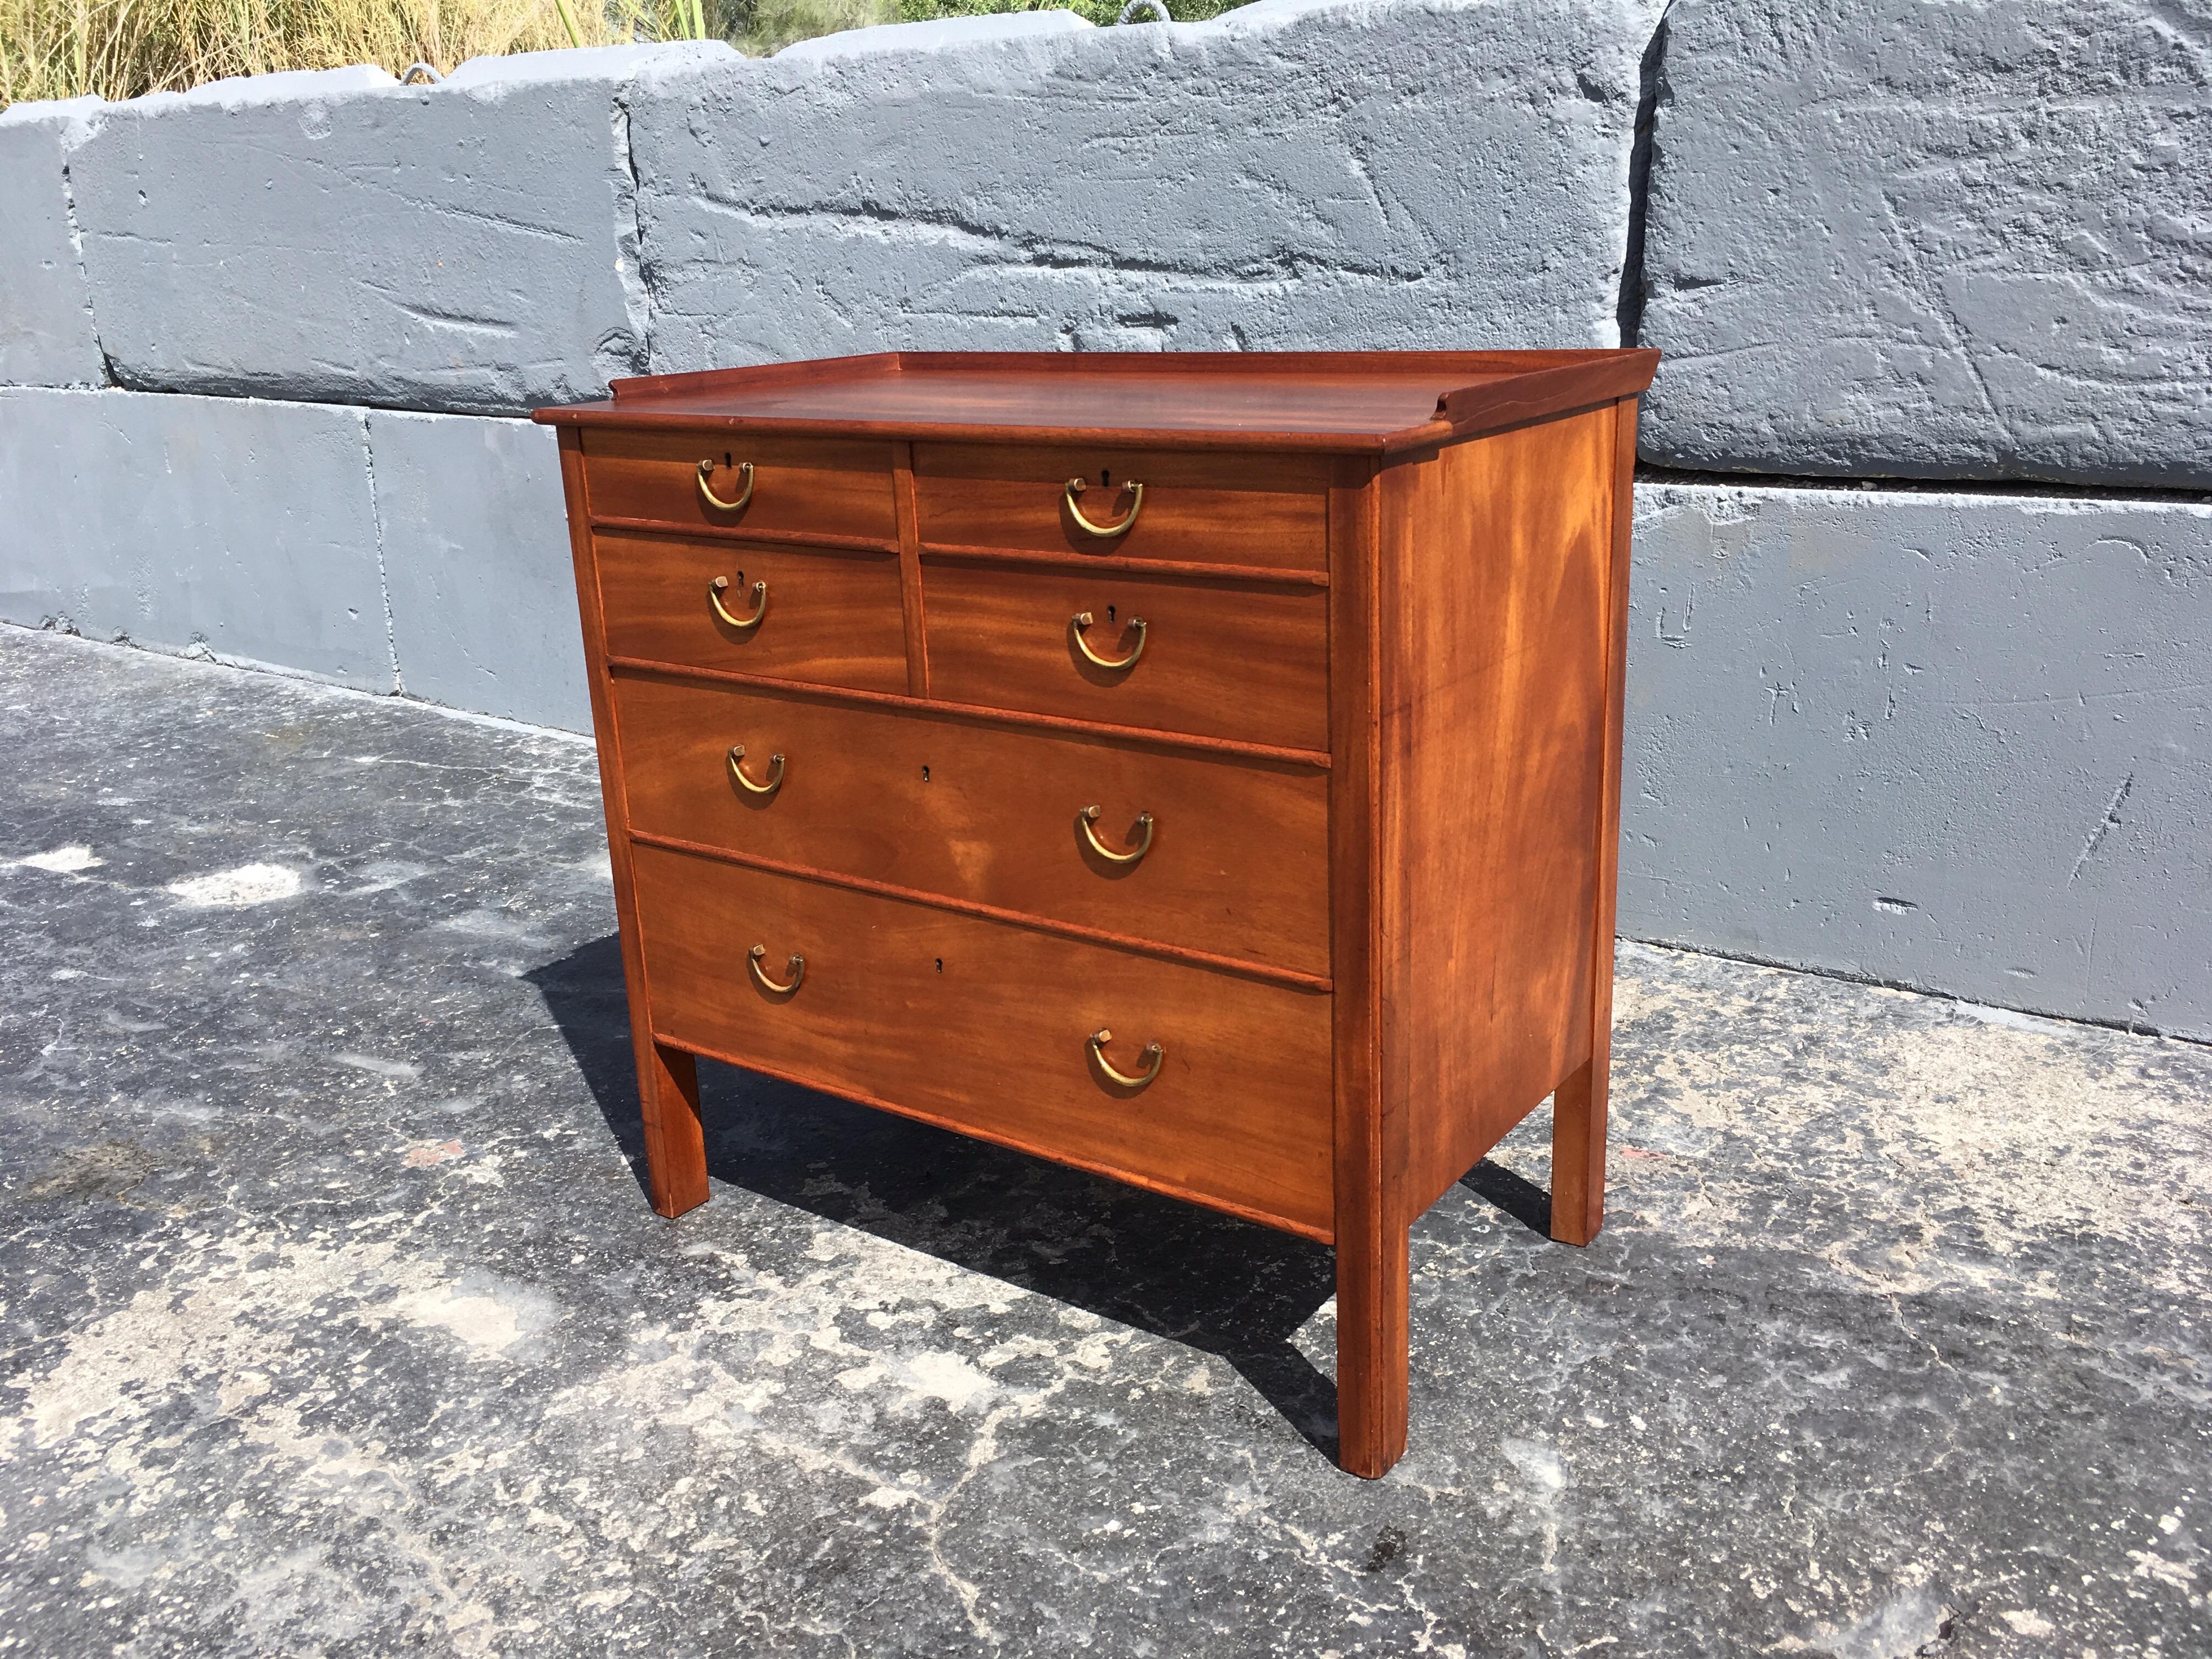 Beautiful chest of drawers by Josef Frank, Mahogany and Brass pulls, six drawers. Cabinet has age-related wear. We will have it refinished for the buyer. Great piece of Swedish Modern.
 